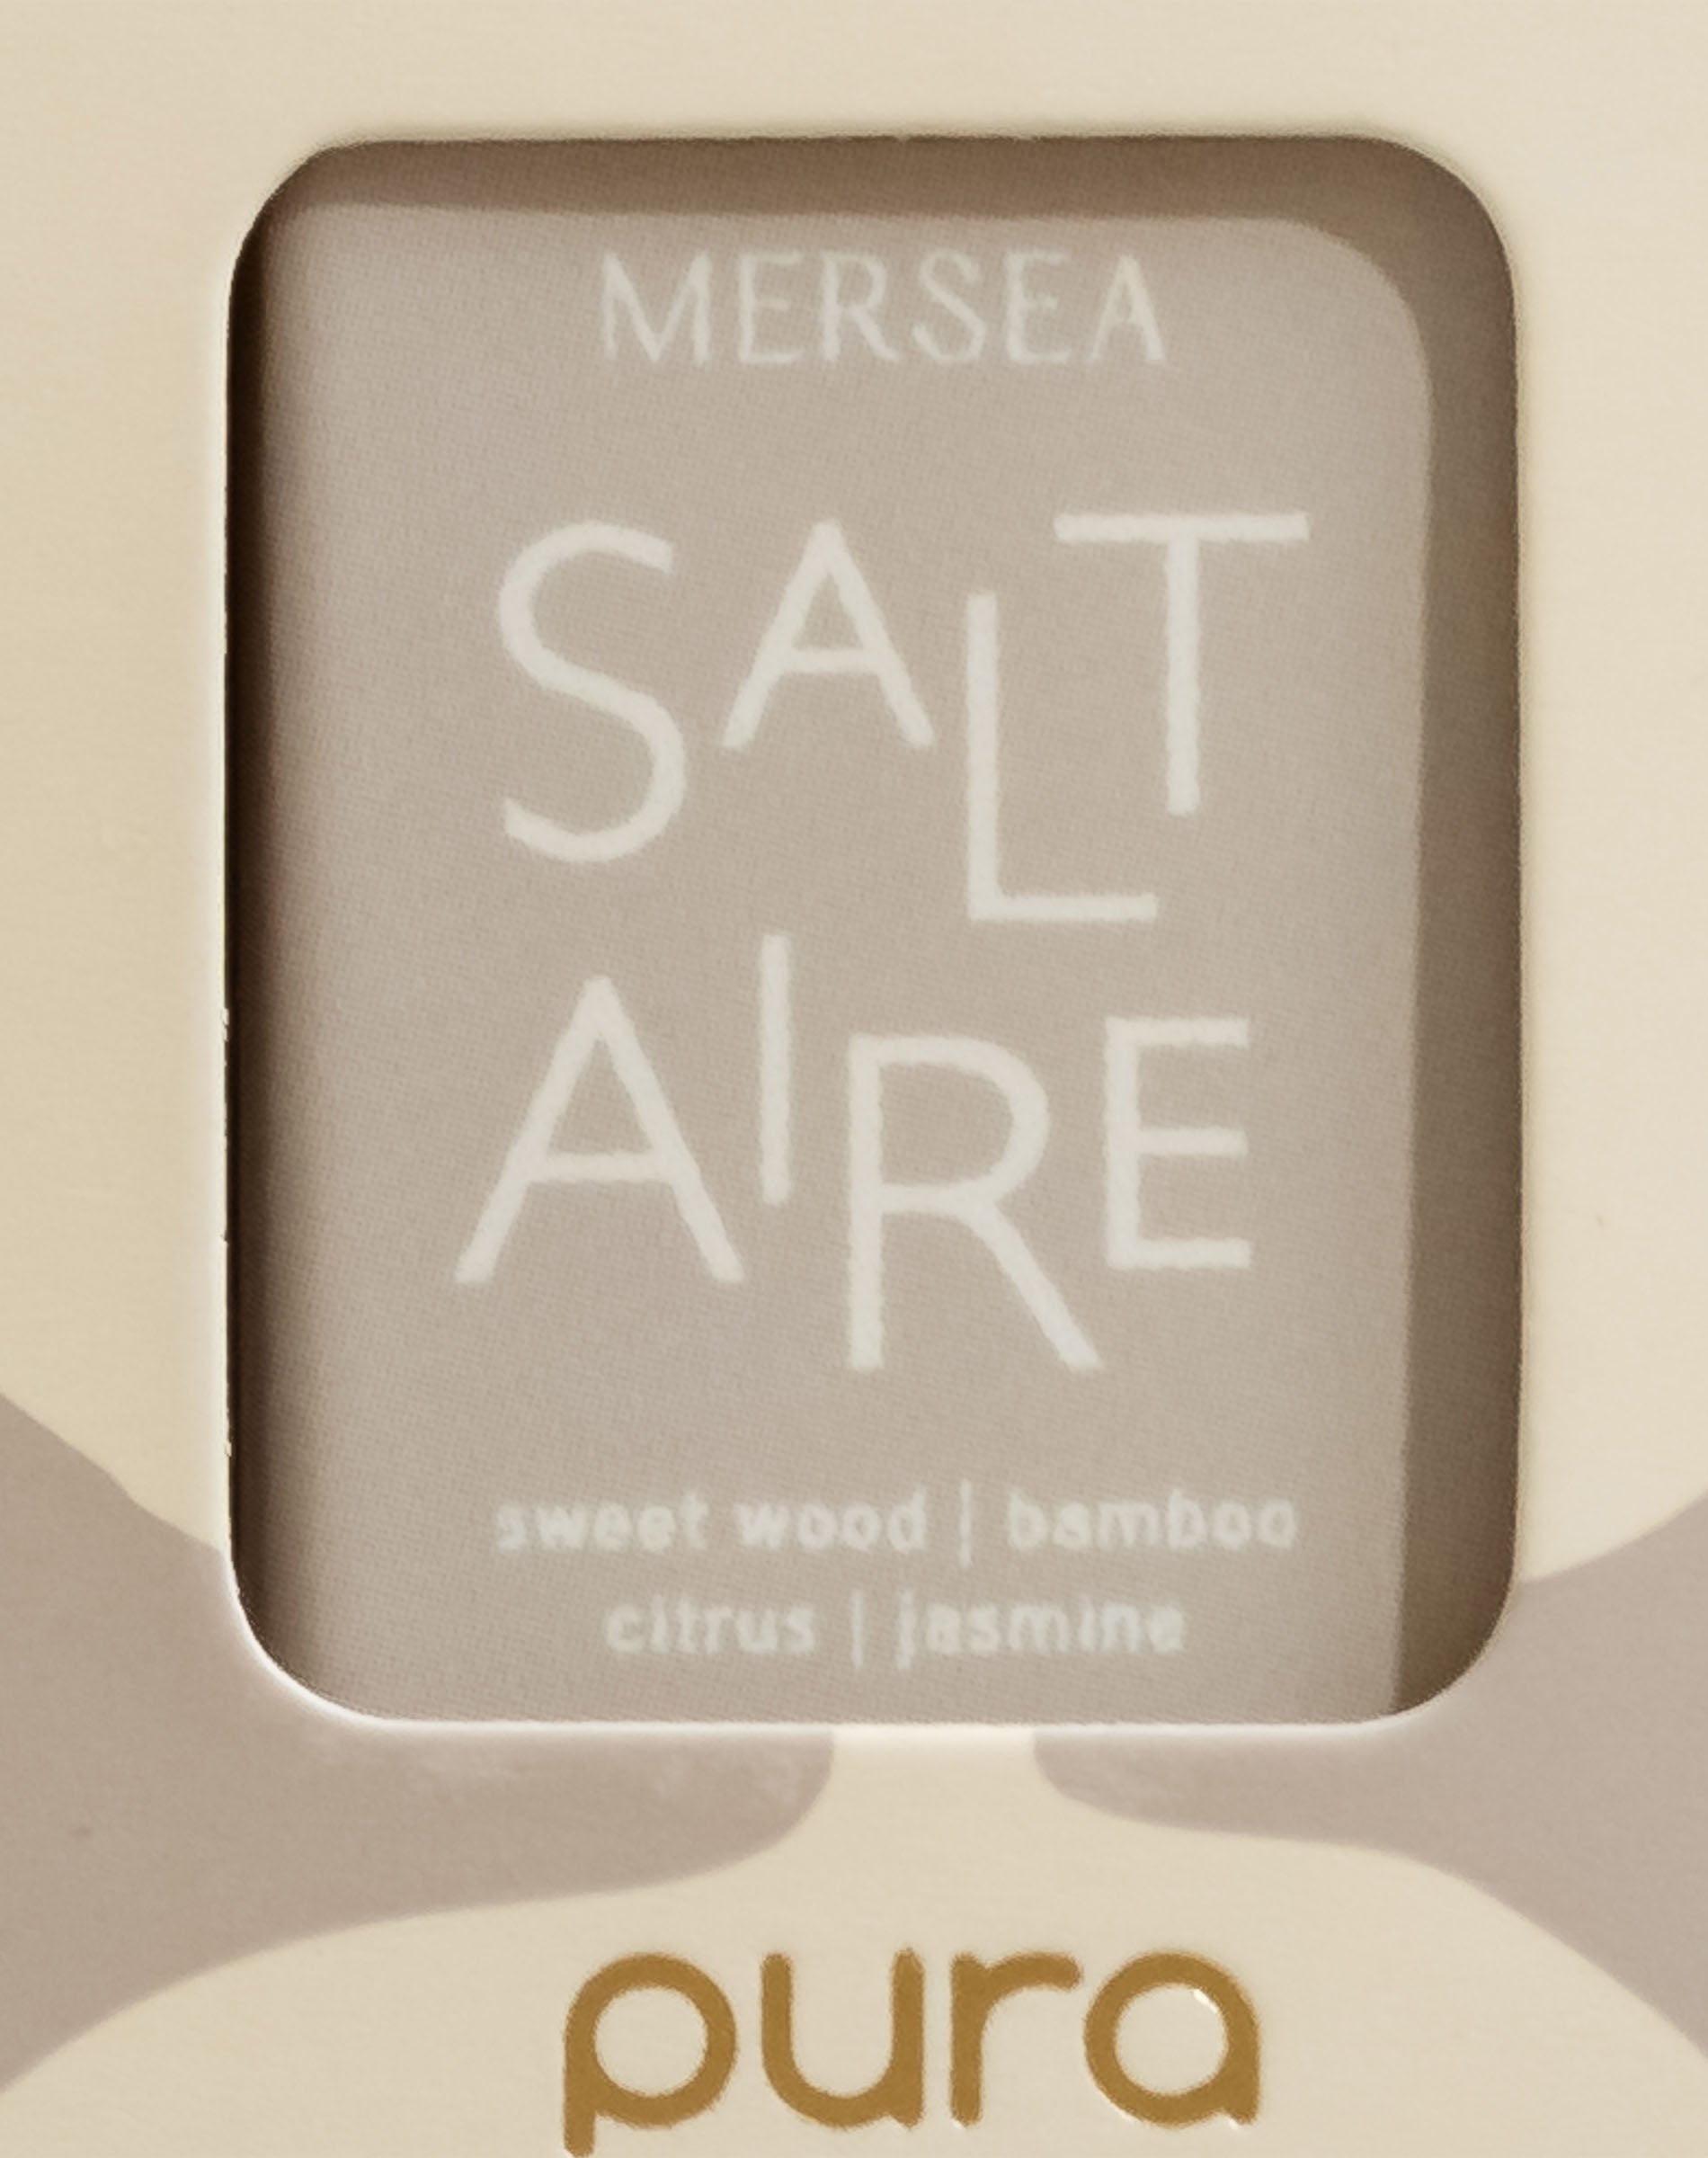 closeup of saltaire logo on boxed pura smart vial of mersea saltaire scent